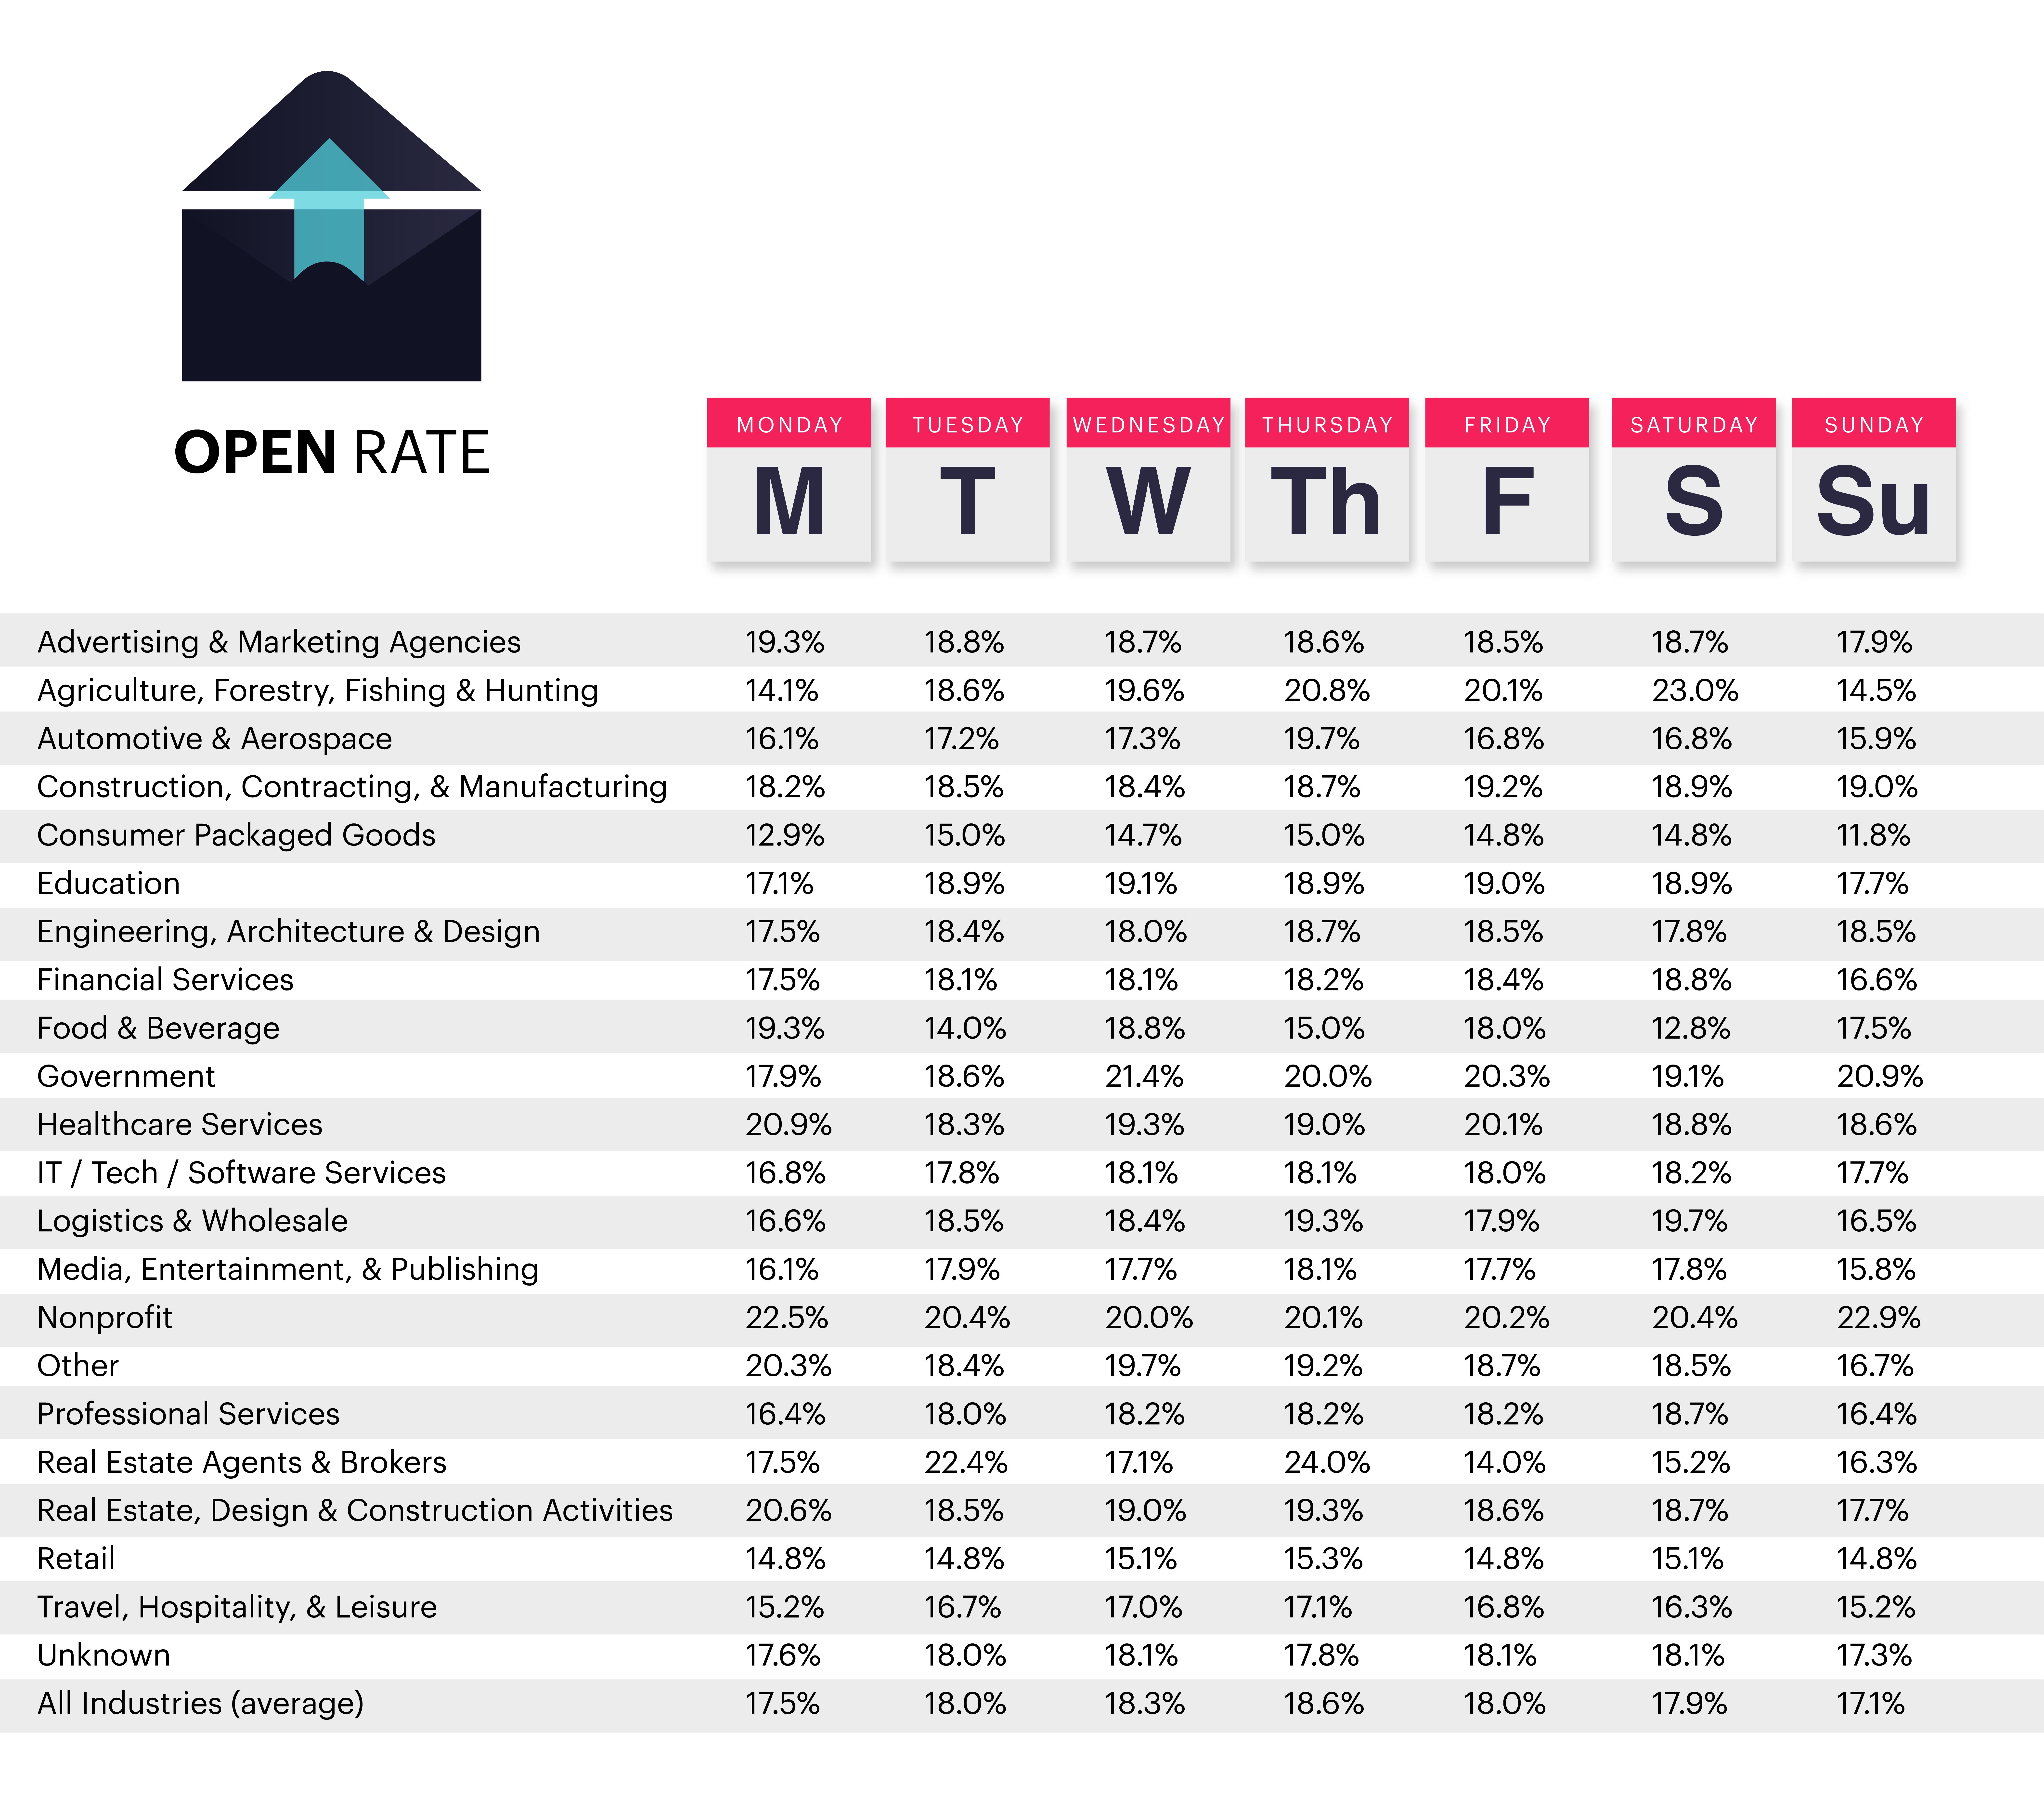 Email open rates by industry email benchmarks infographic. This infographic shows industry-specific data and statistics on email open rates.